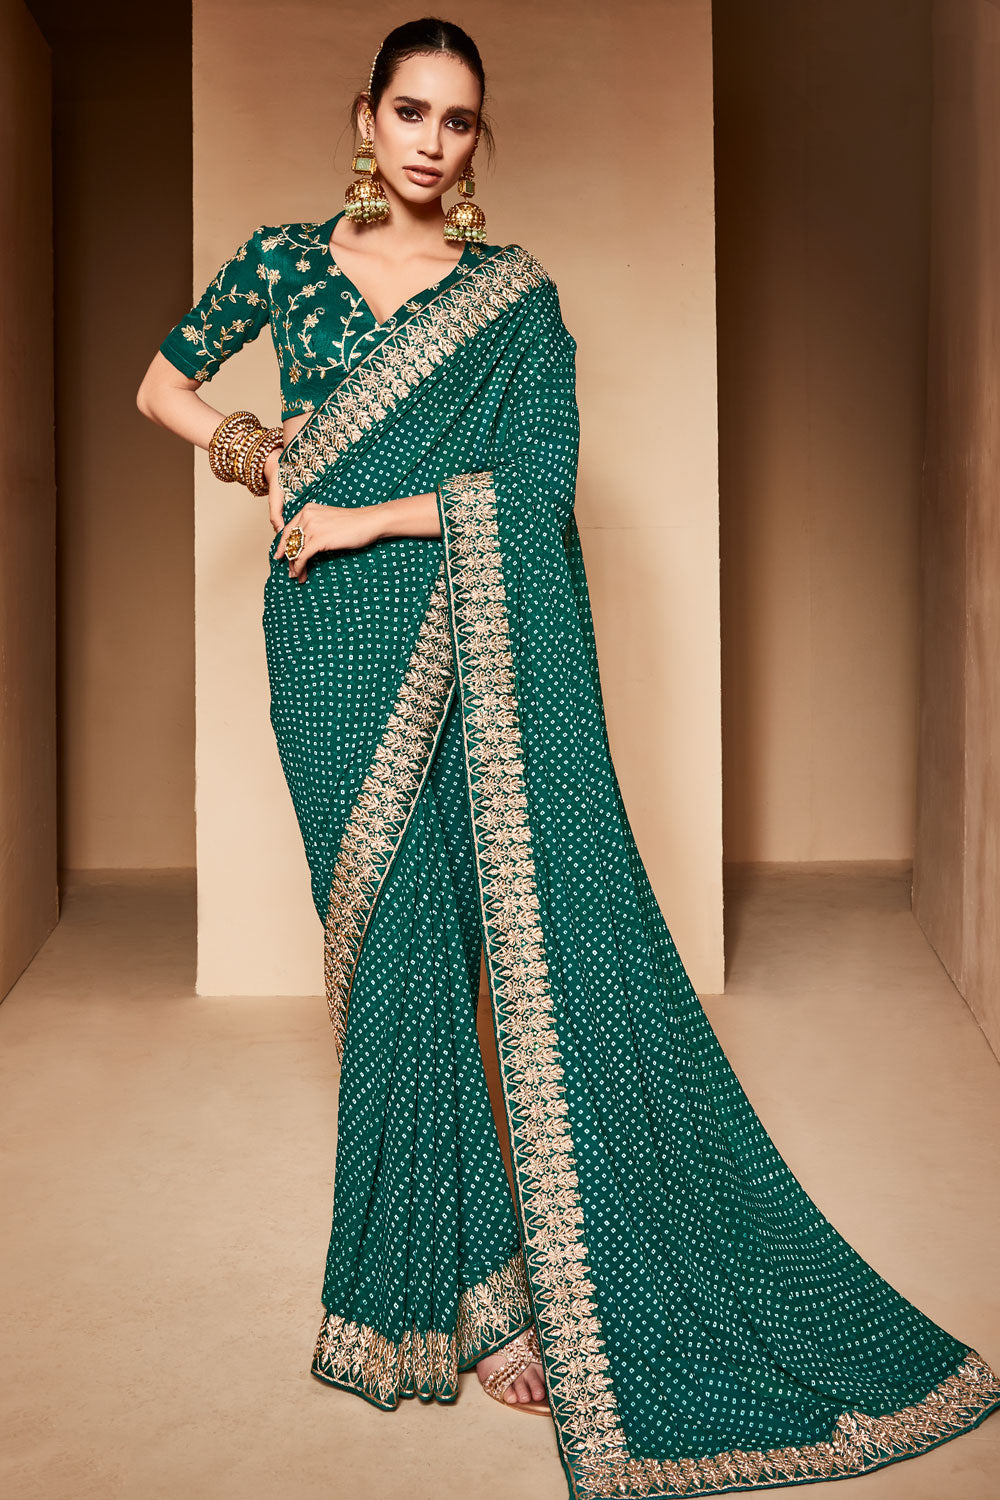 Pine Green Bandhani Saree With Embroidery Lace Border